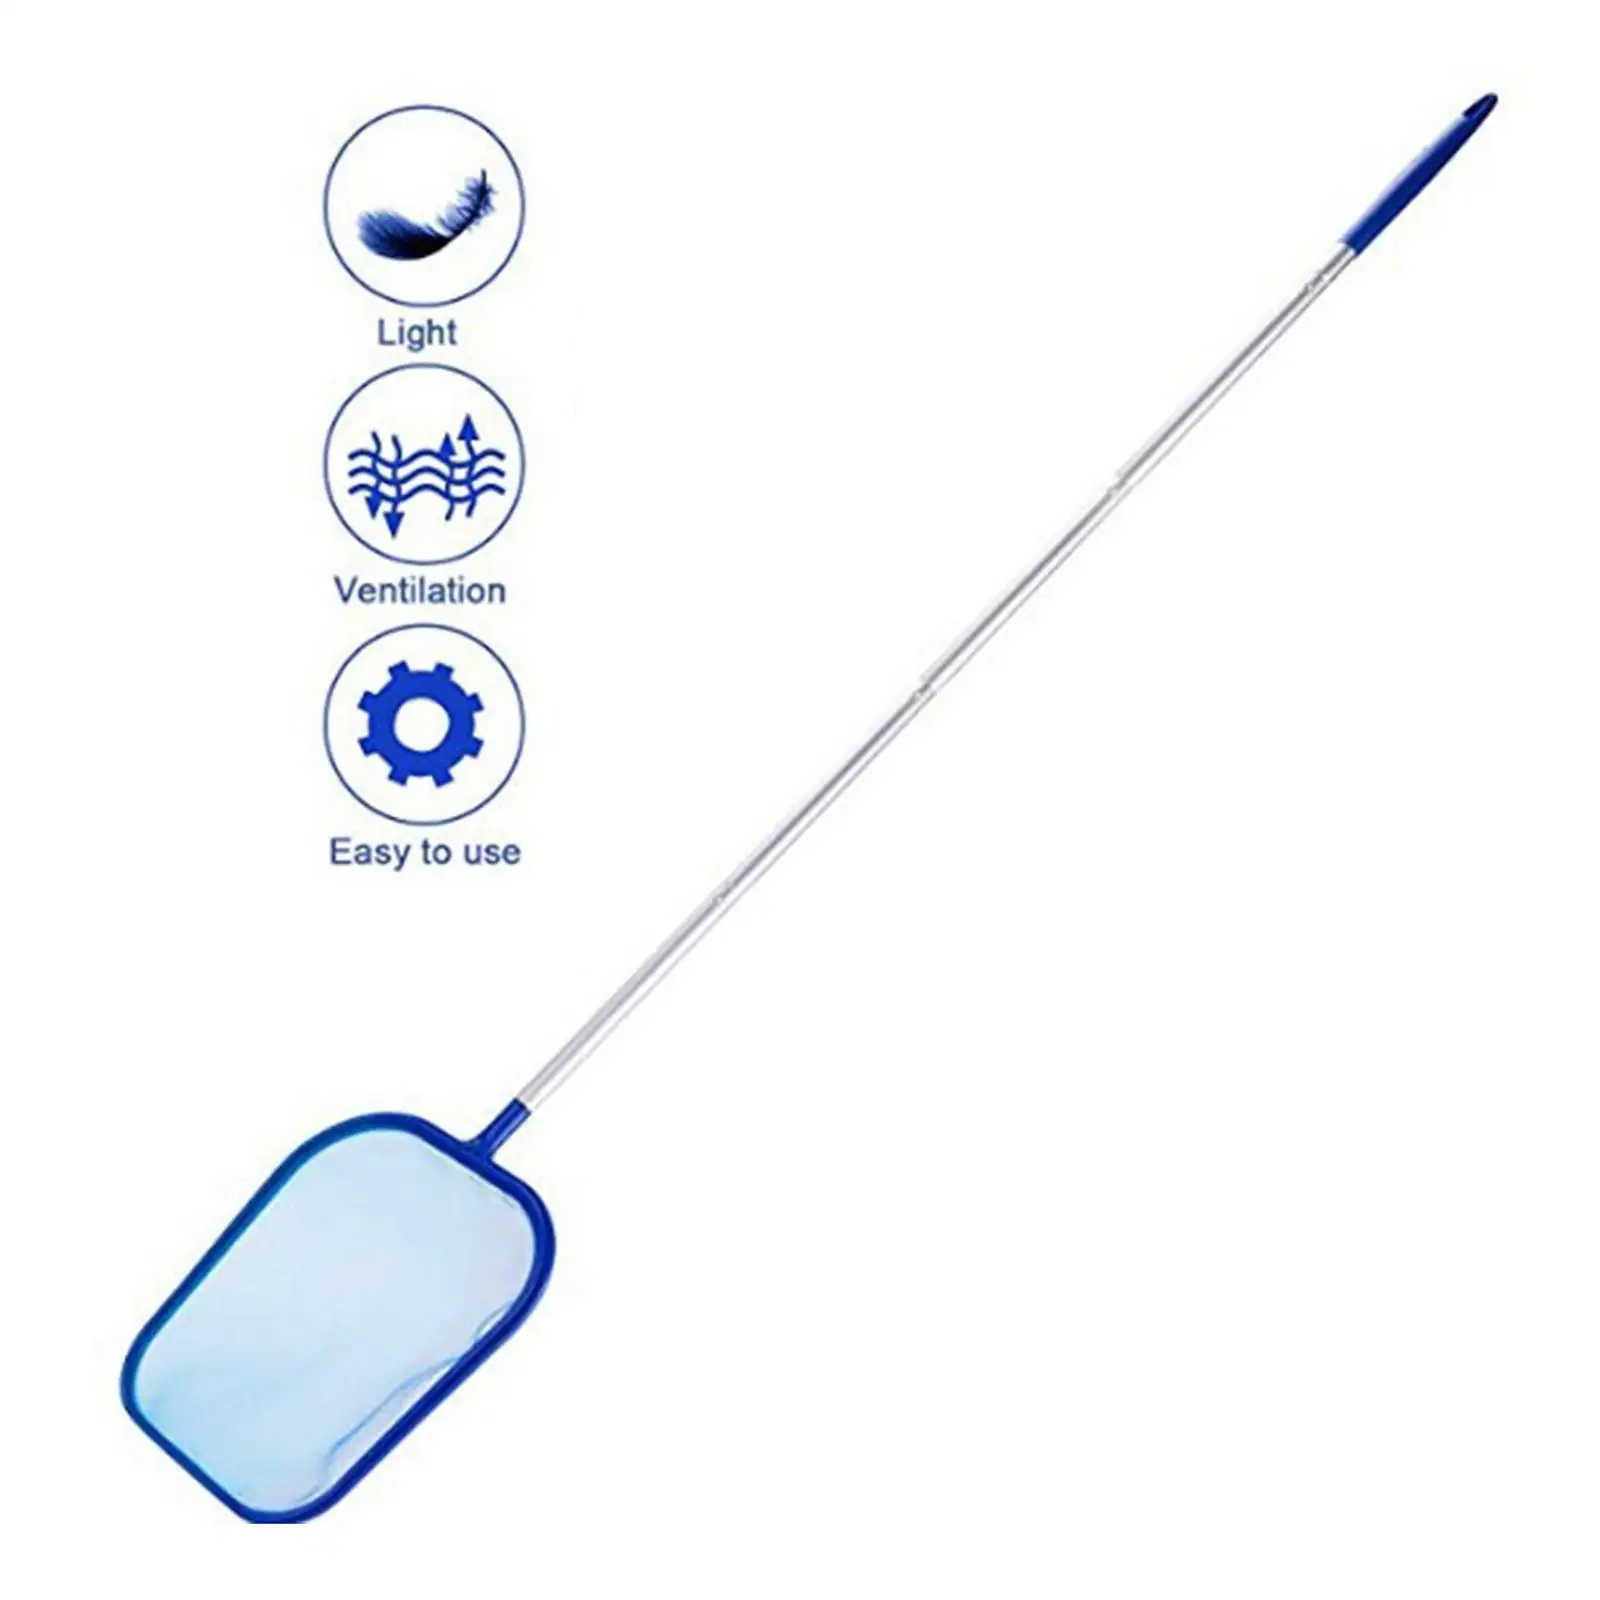 

162cm 5.3Ft Pool Leaf Skimmer Net Tools with Pole for Hot Top Fountain